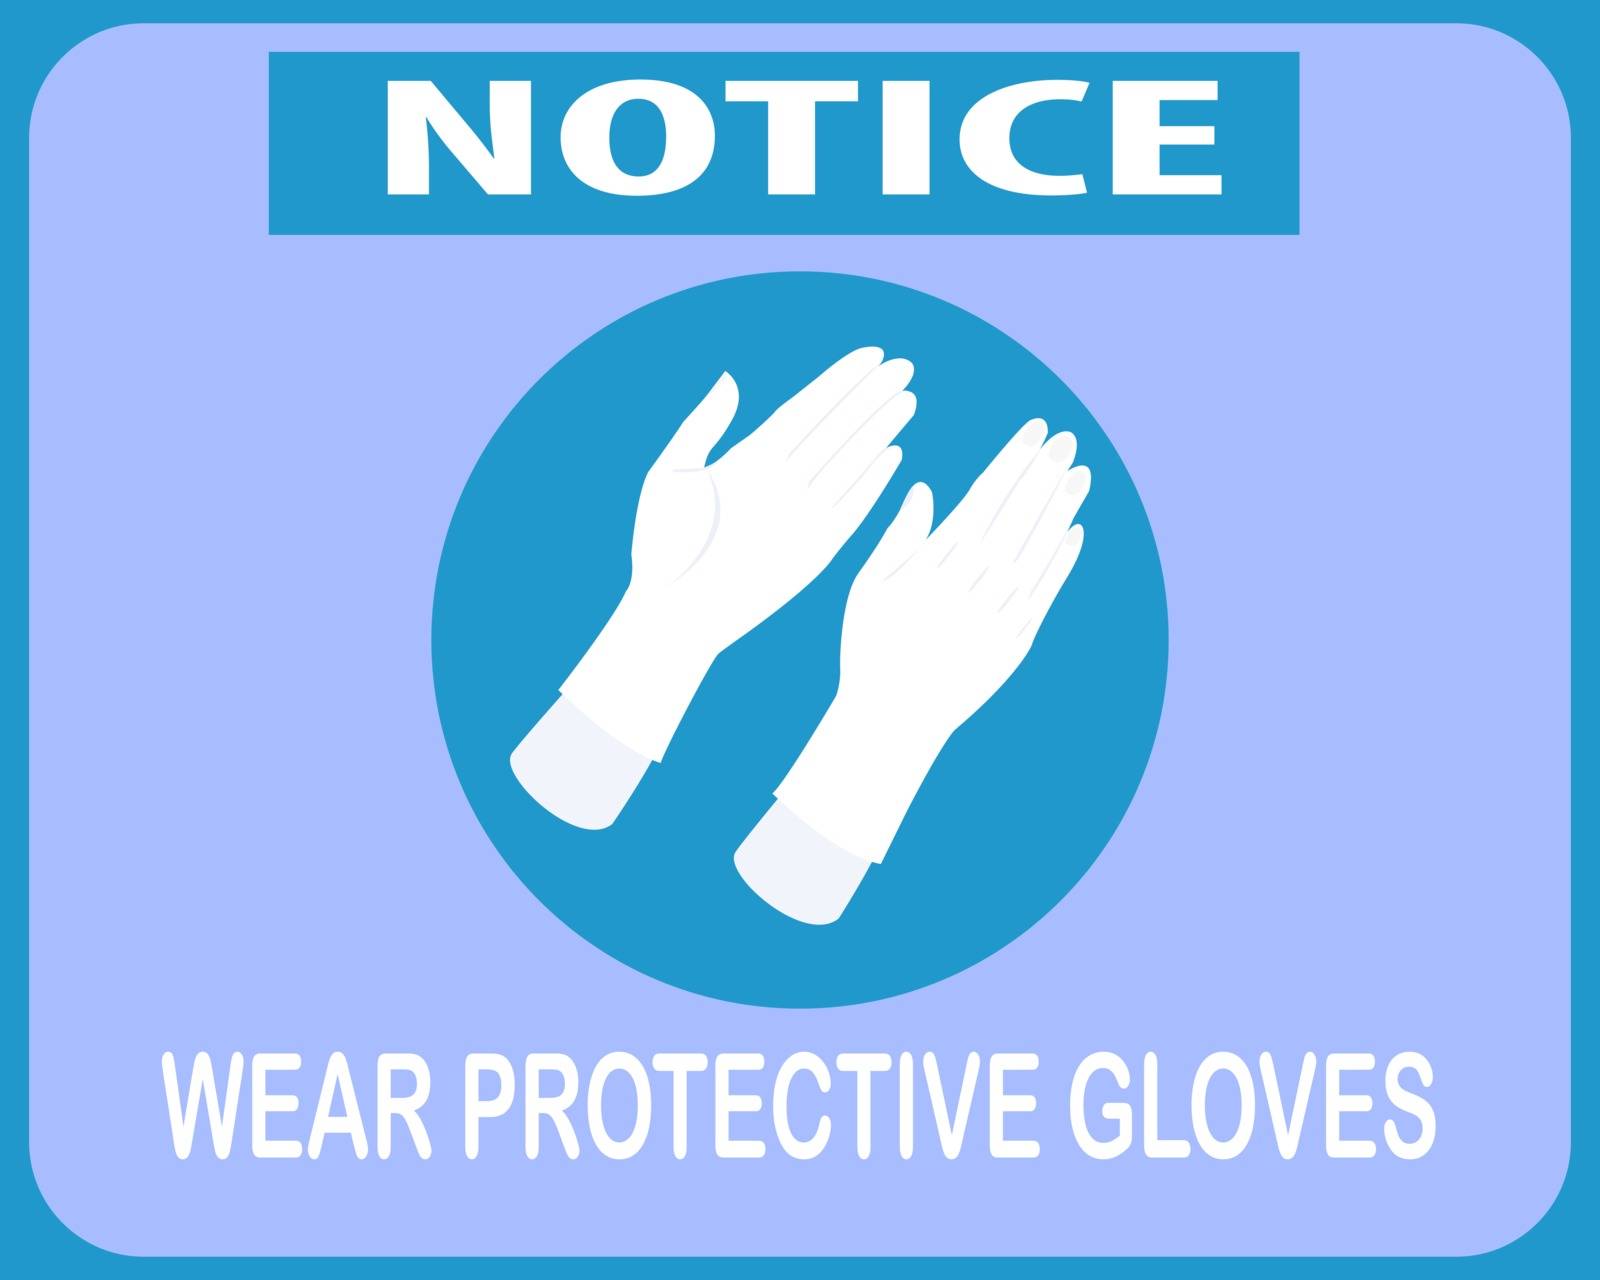 notice,caution wear glove, safety instruction for hygiene and protection